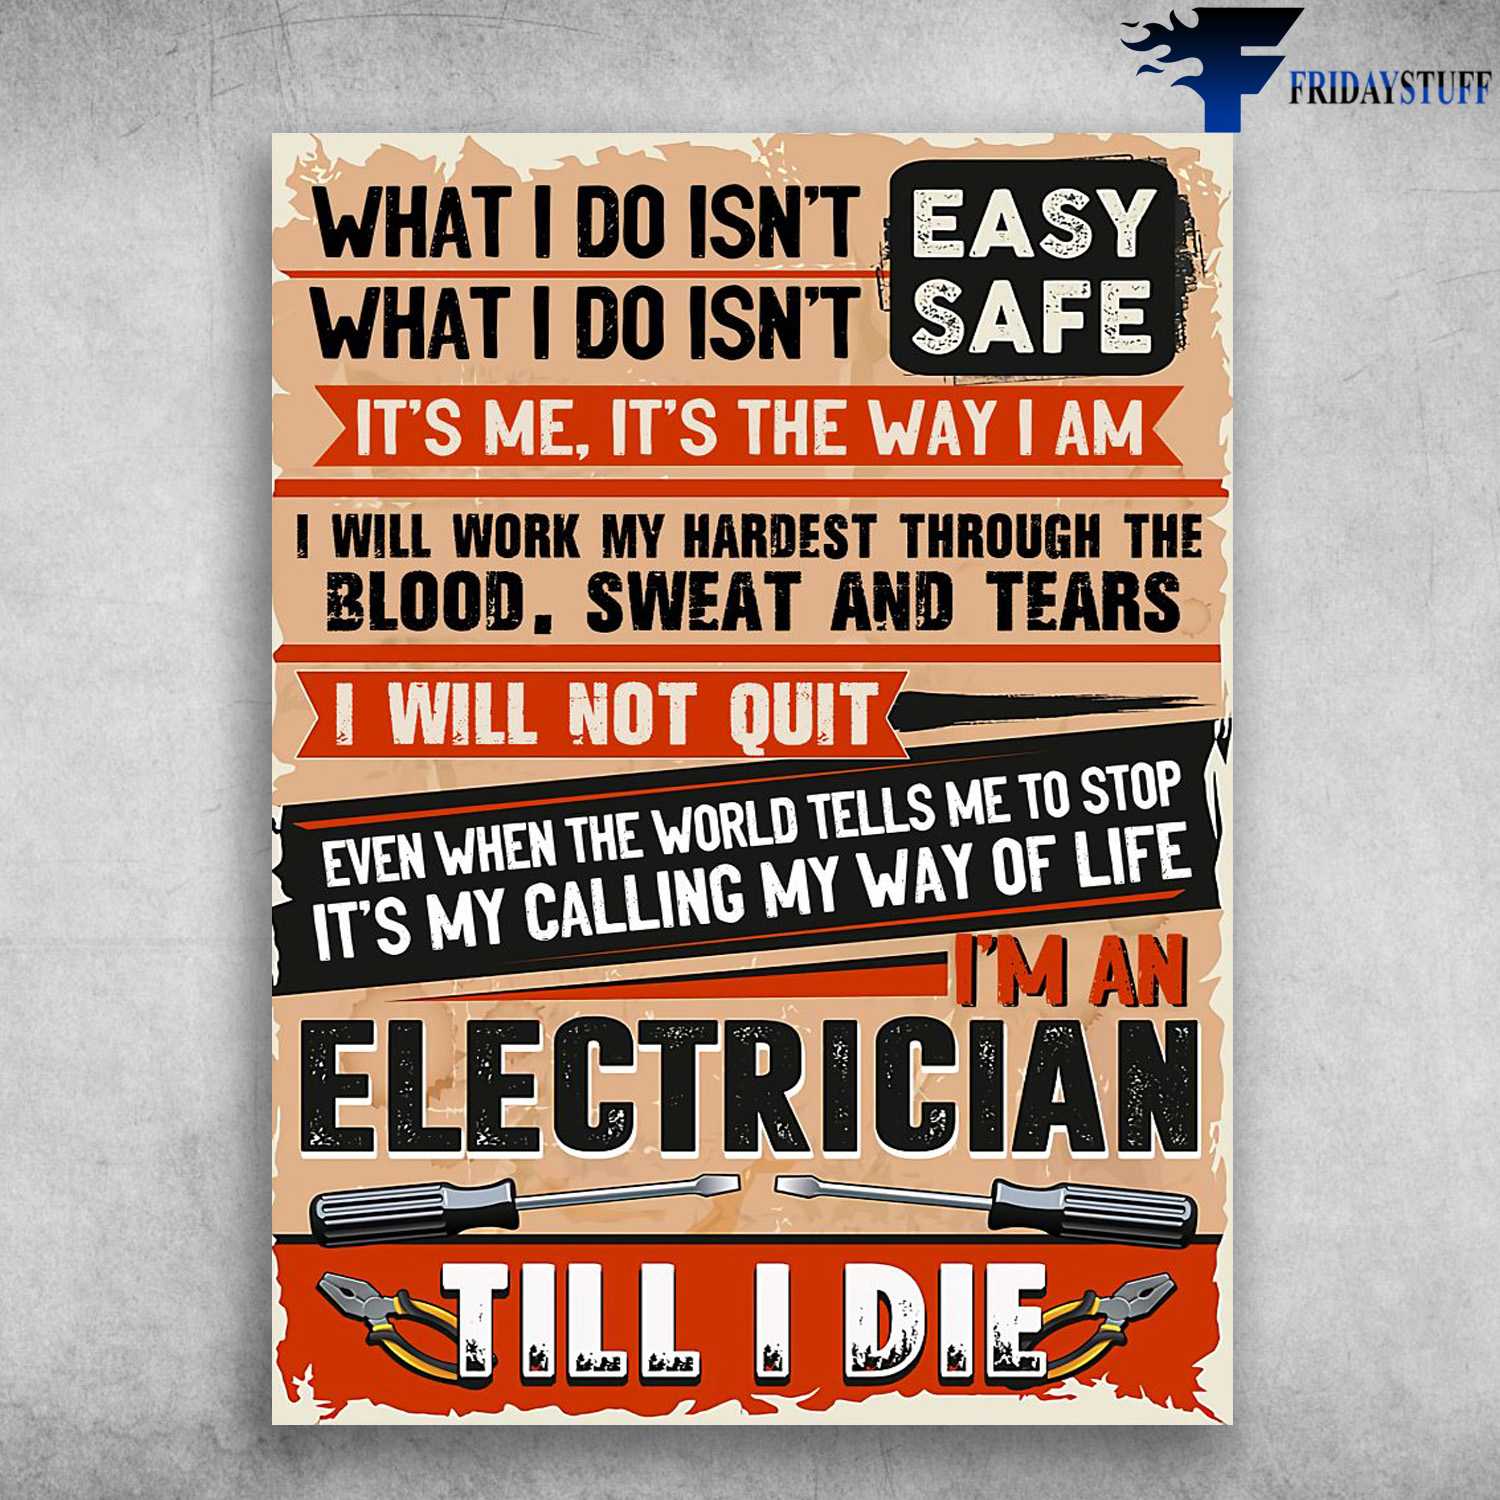 Electrician Poster - What I Do Isn't Easy, What I Do Isn't Safe, It's Me, It's The Way I Am, I Will Worl My Hardest Through The Blood, Sweat And Tears, I', An Electrician